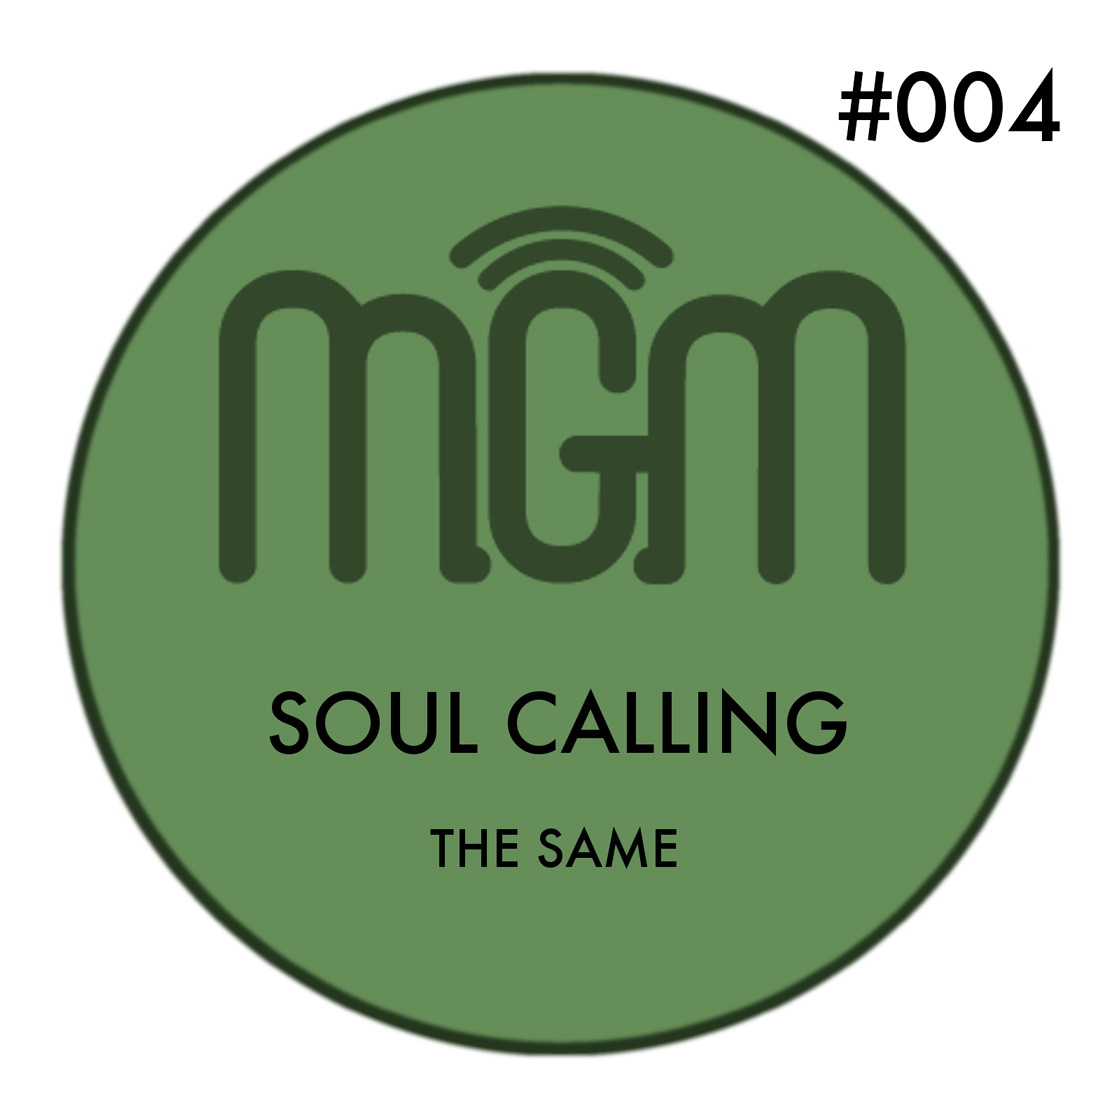 Download The SAME - Soul Calling